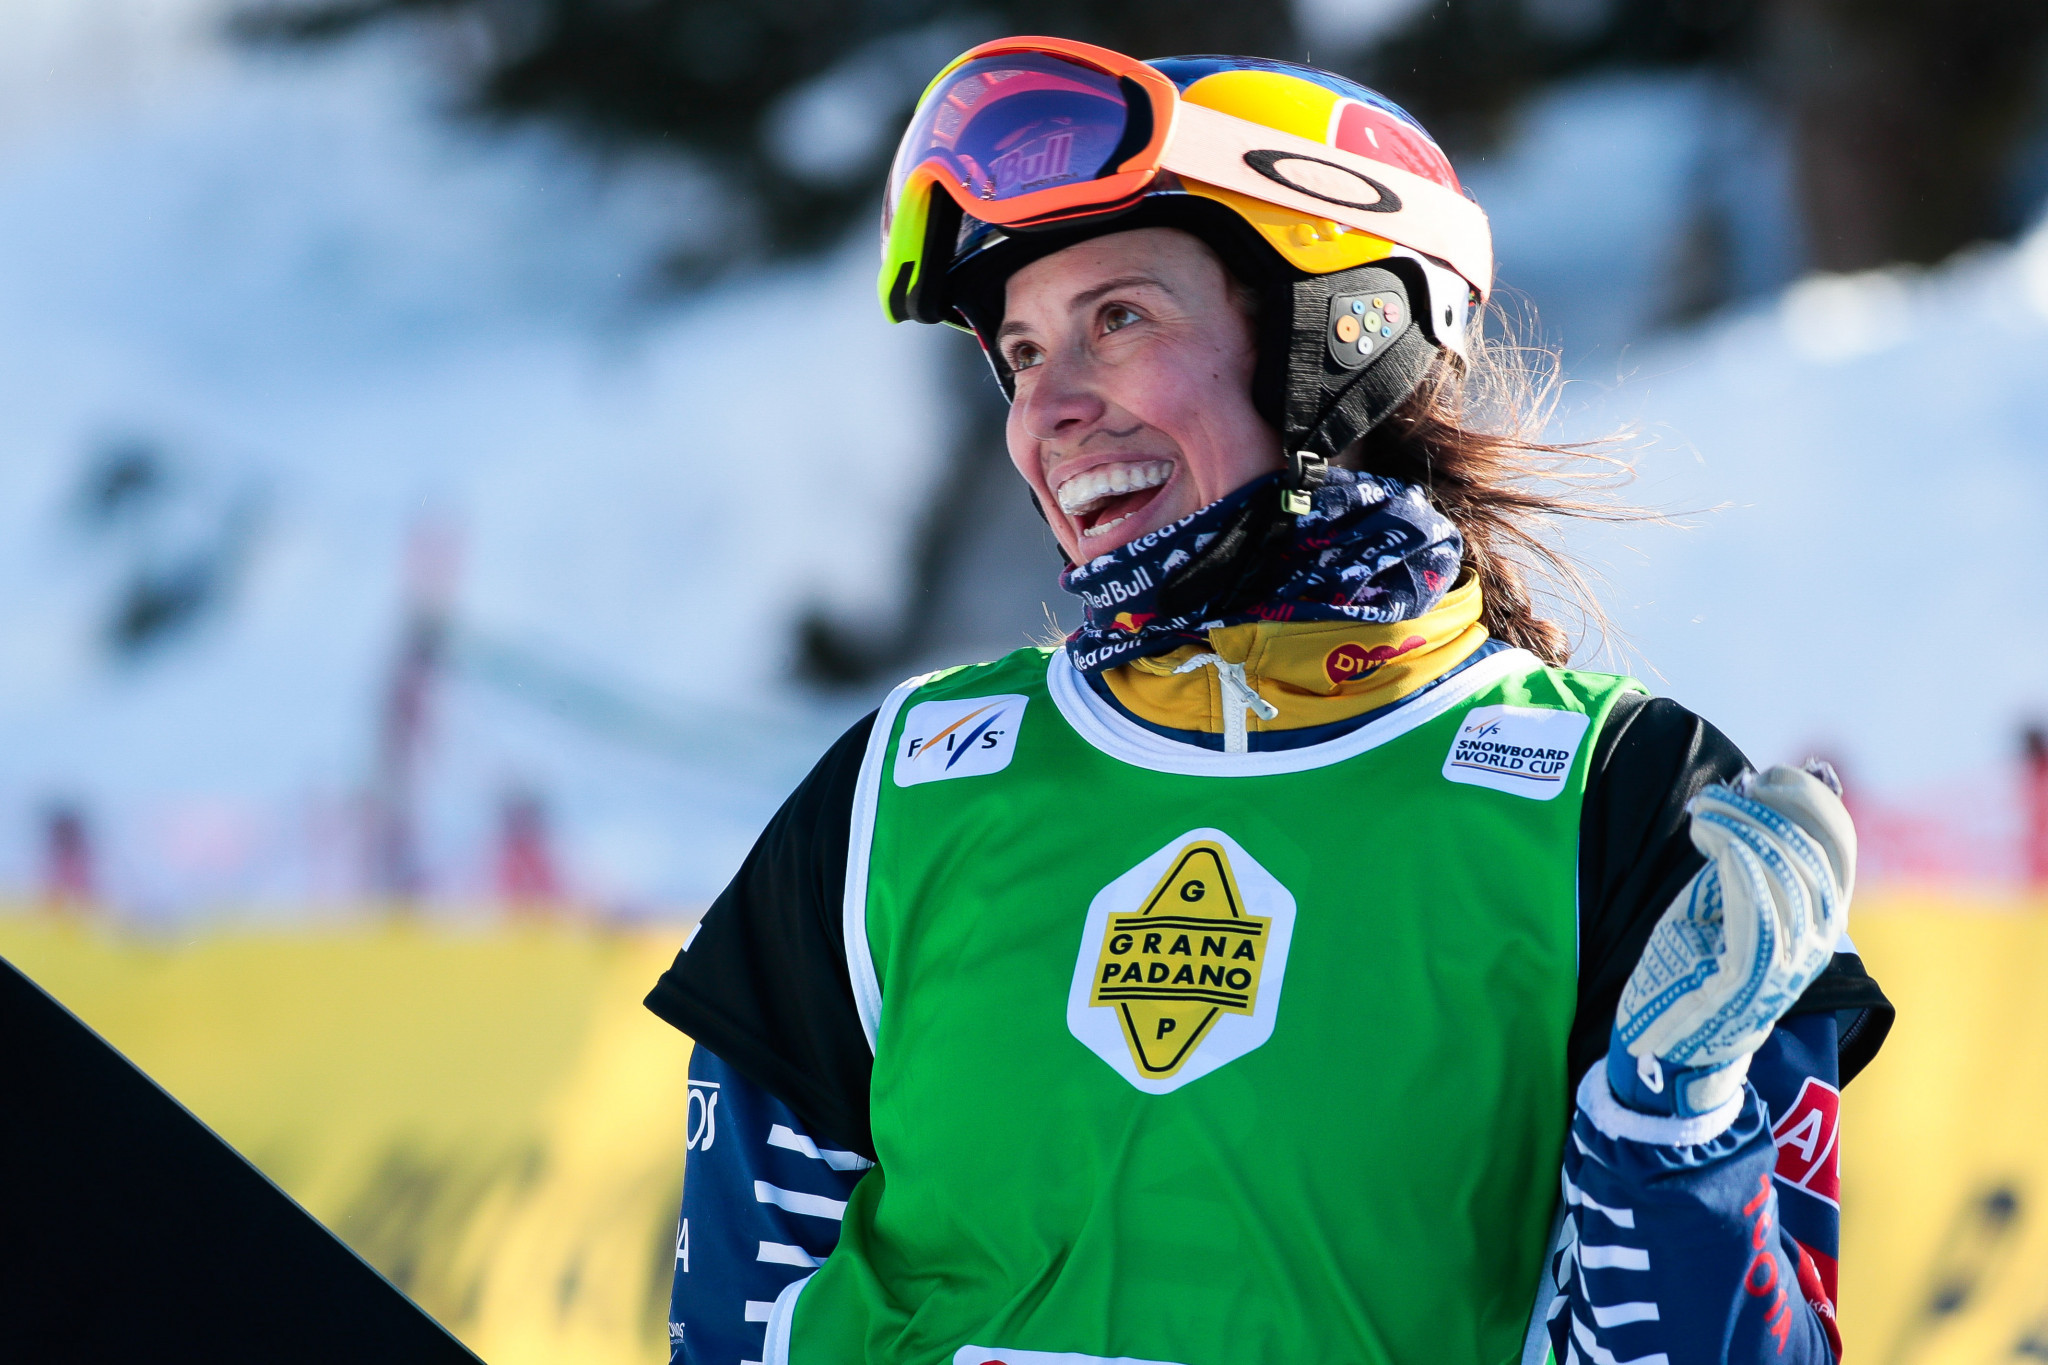 Samková and Surget star in qualifying at Snowboard Cross World Cup in Bakuriani